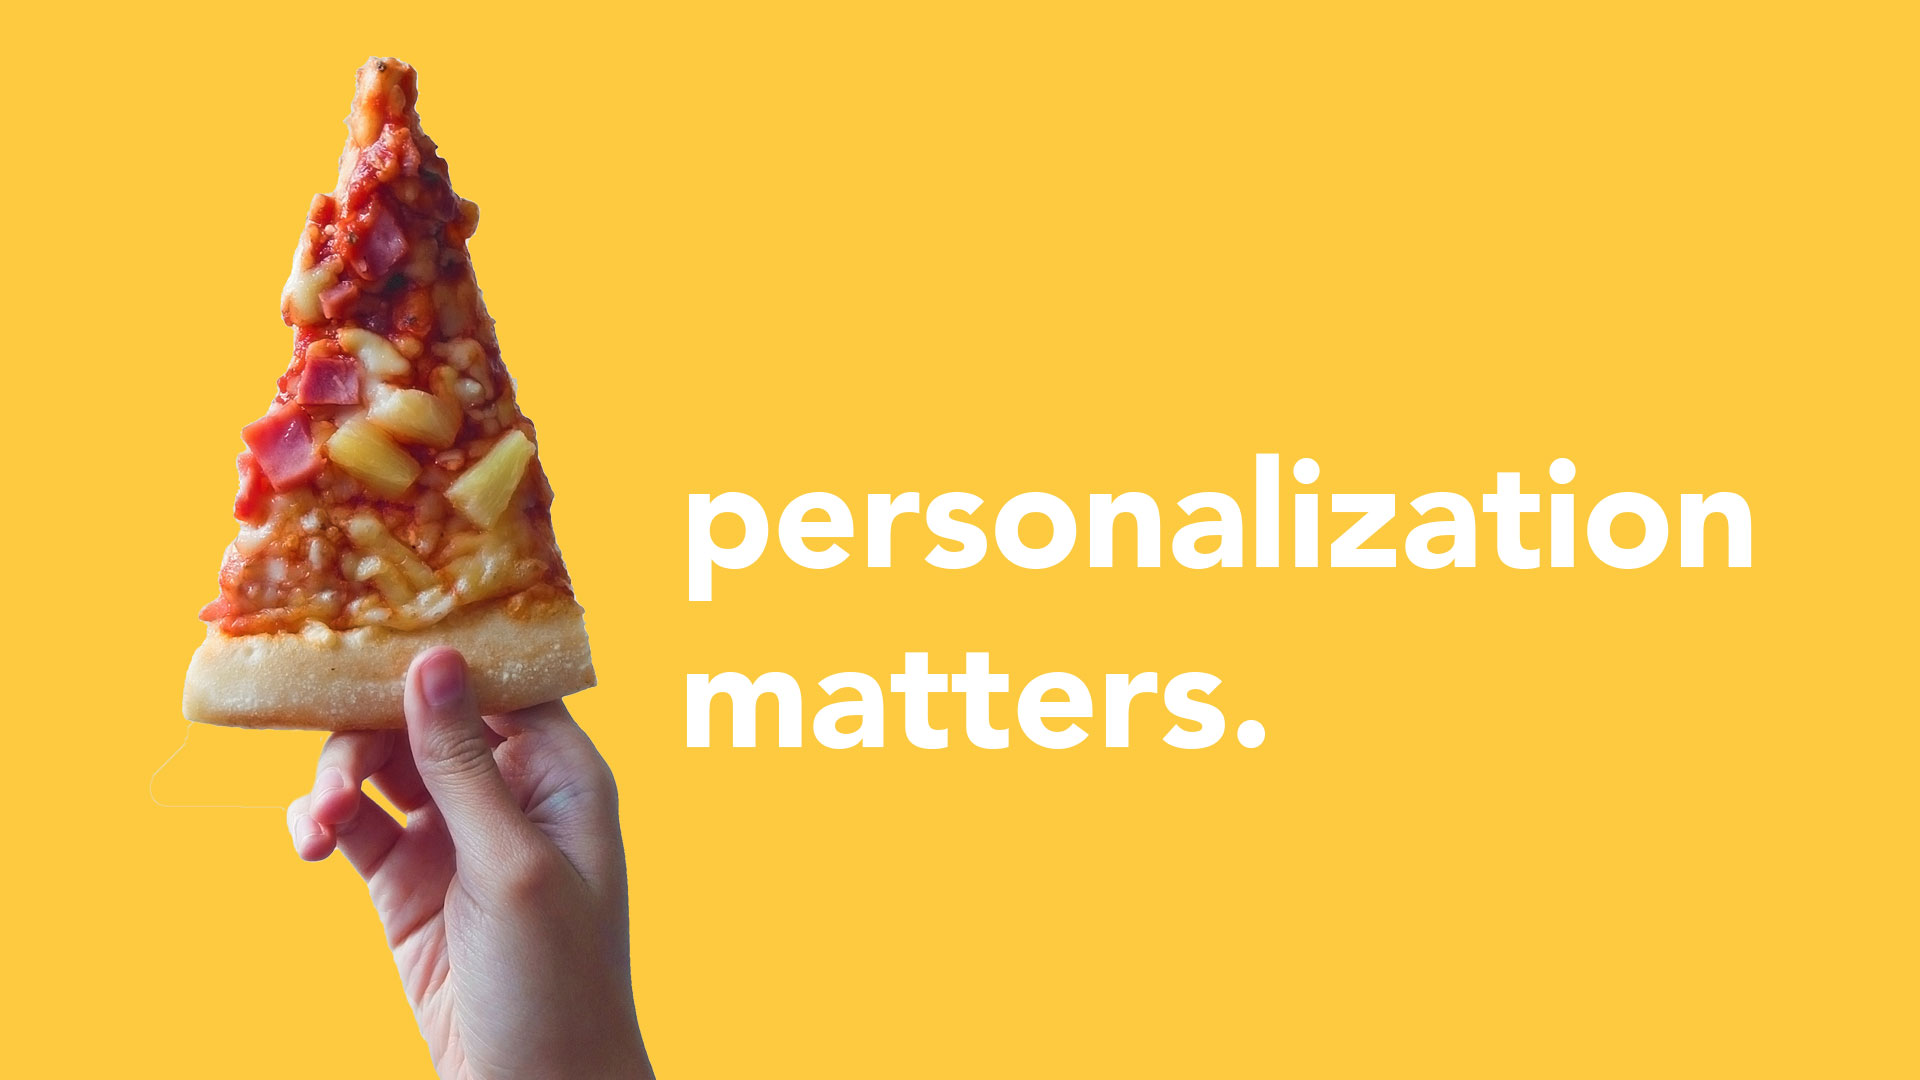 Everything You Need to Know About Personalization for Restaurants